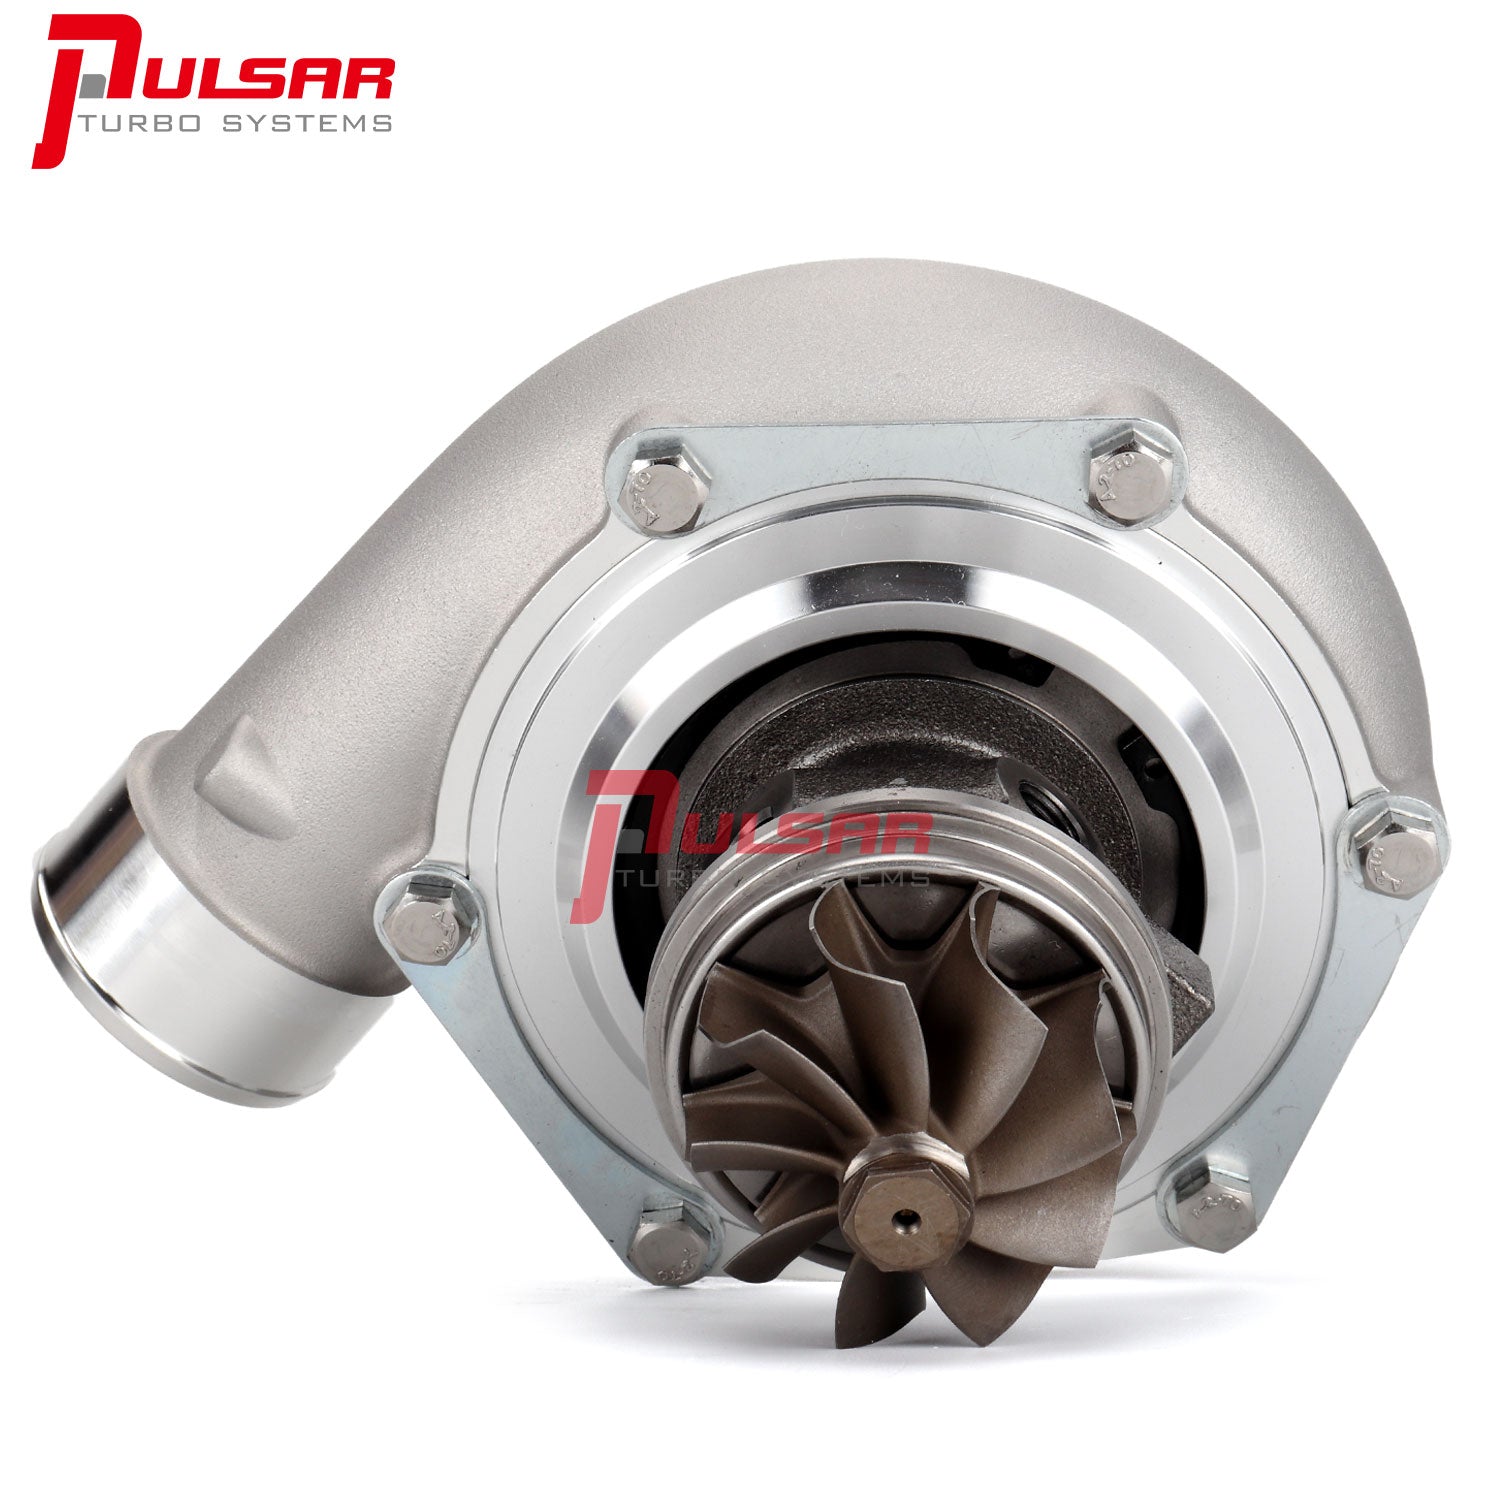 PSR PULSAR Next GEN 6784 for Ford Falcon to replace the factory GT3582R turbo